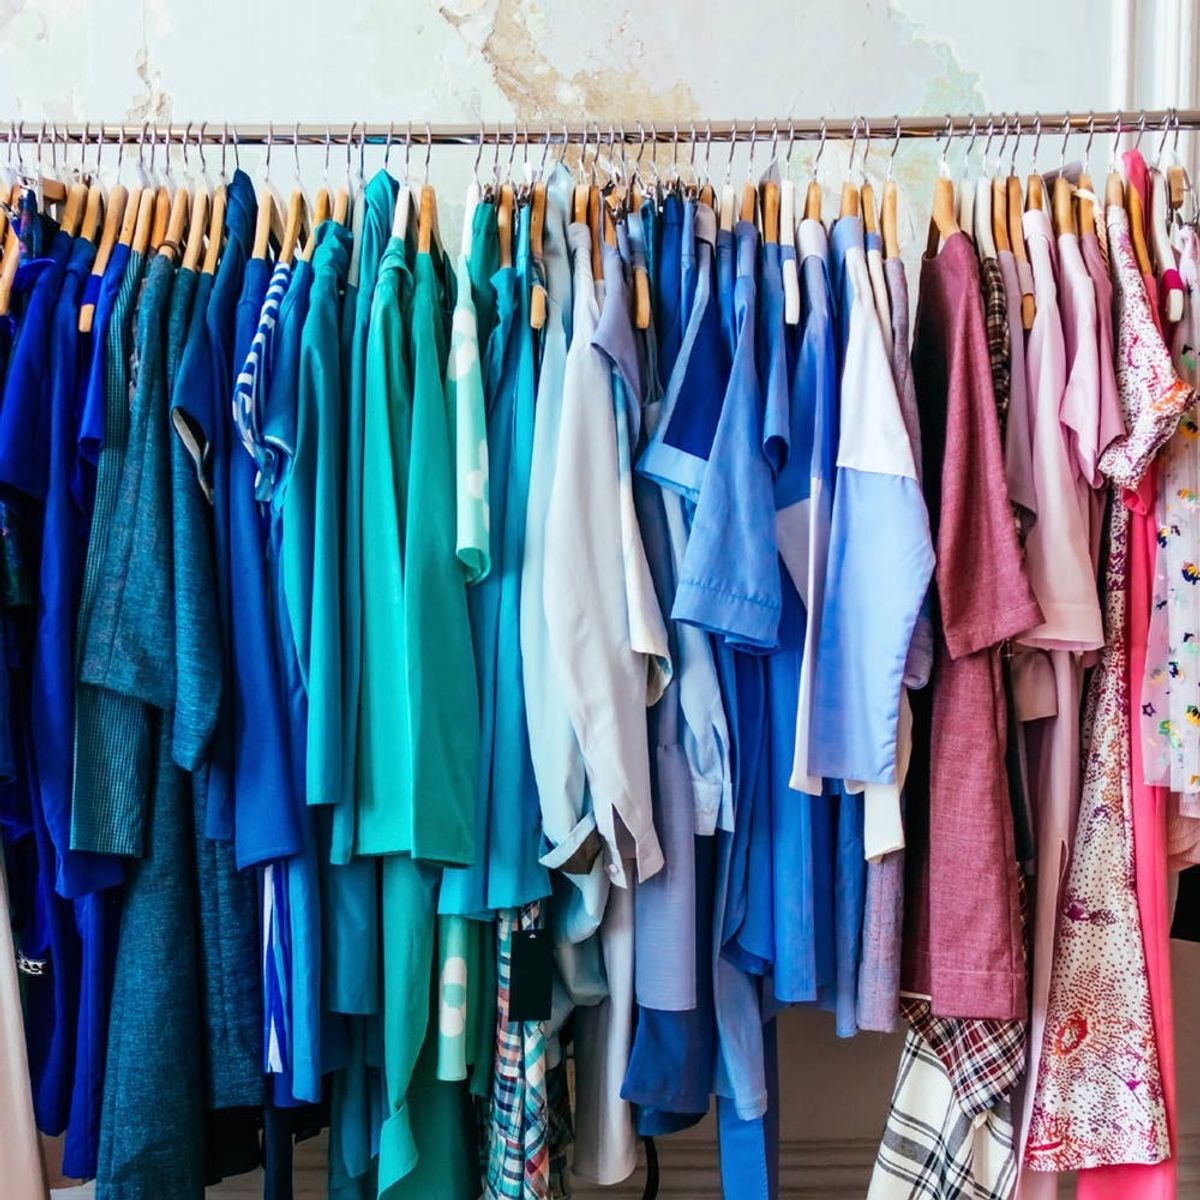 6 Pro Tips to Make Your Clothes Last Longer - Brit + Co